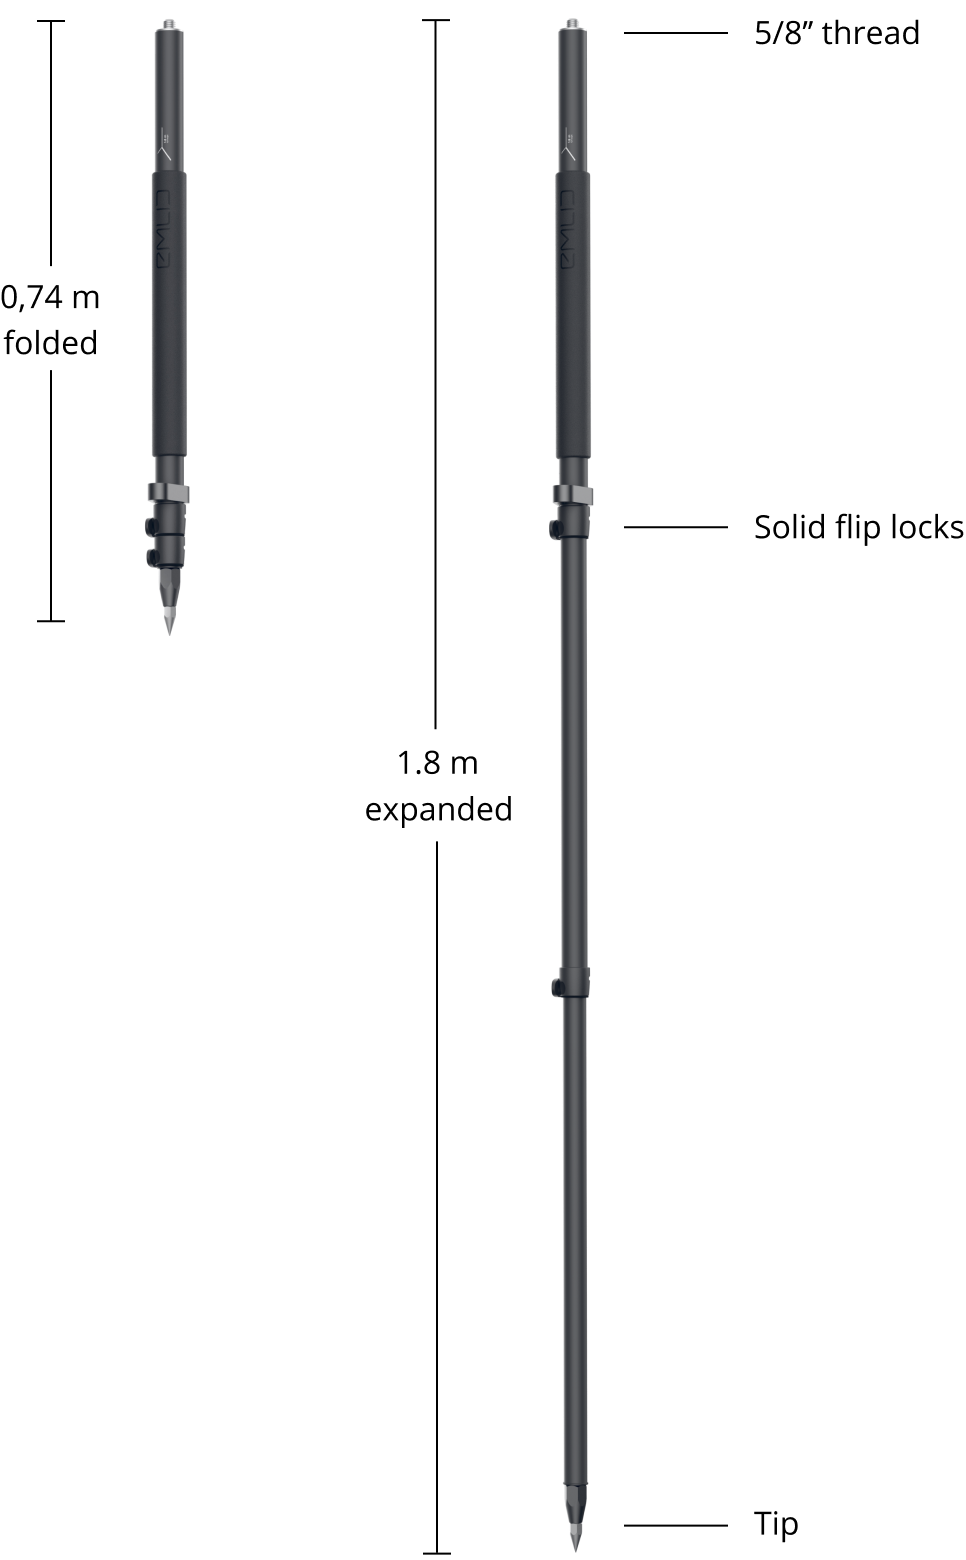 EMLID Telescopic Alu Pole 1.8m for RS2/RS+ (with holder) image 5_EPOTRONIC